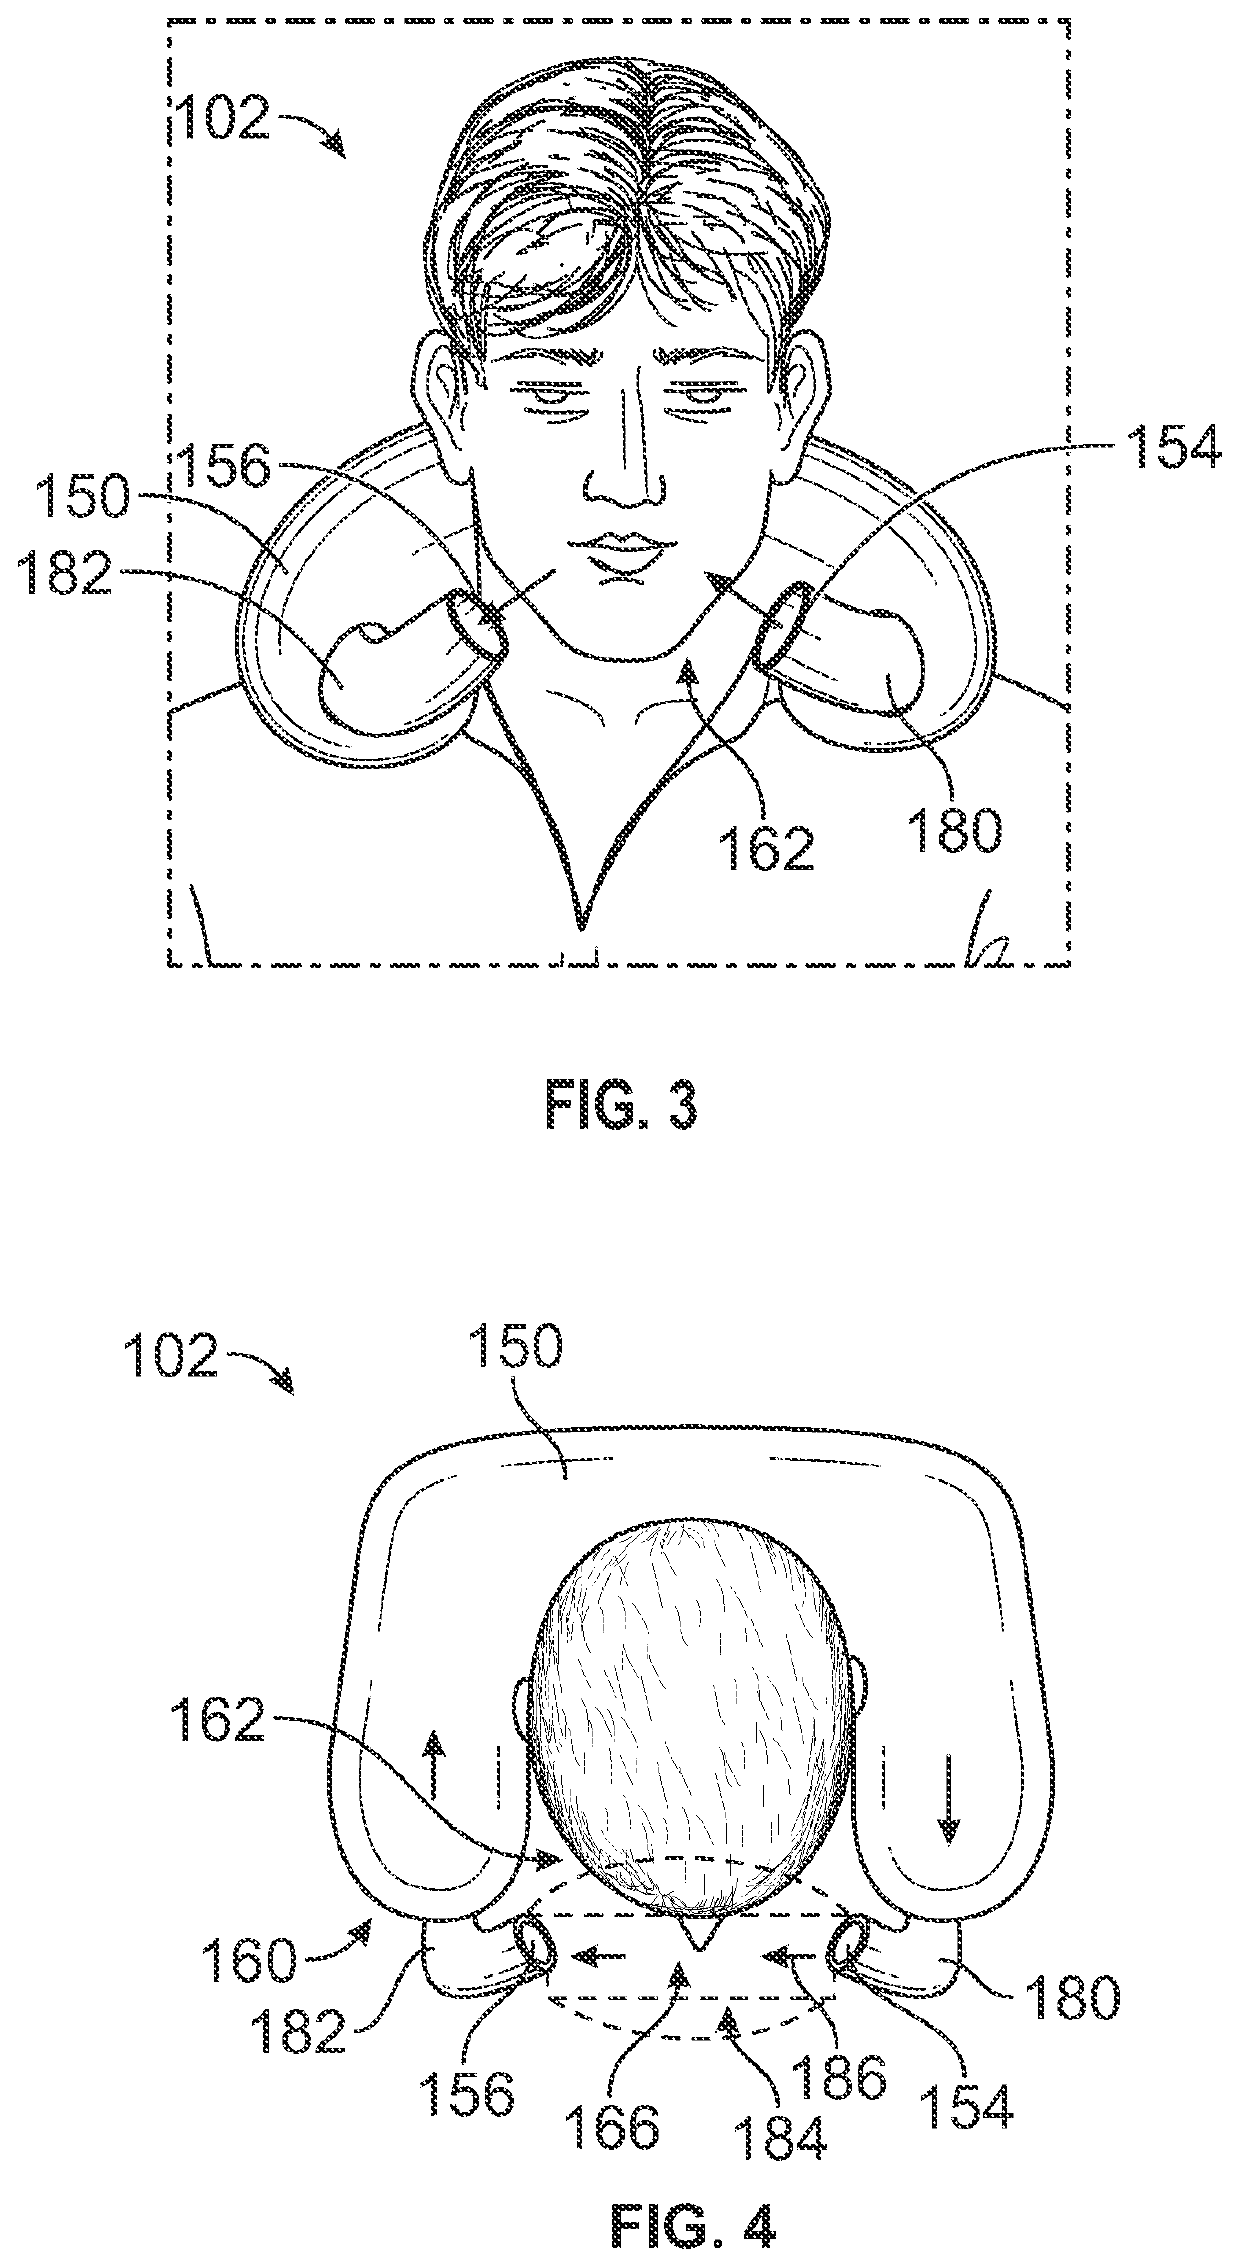 Personal ventilation device and method for delivering sanitized air to personal breathing space